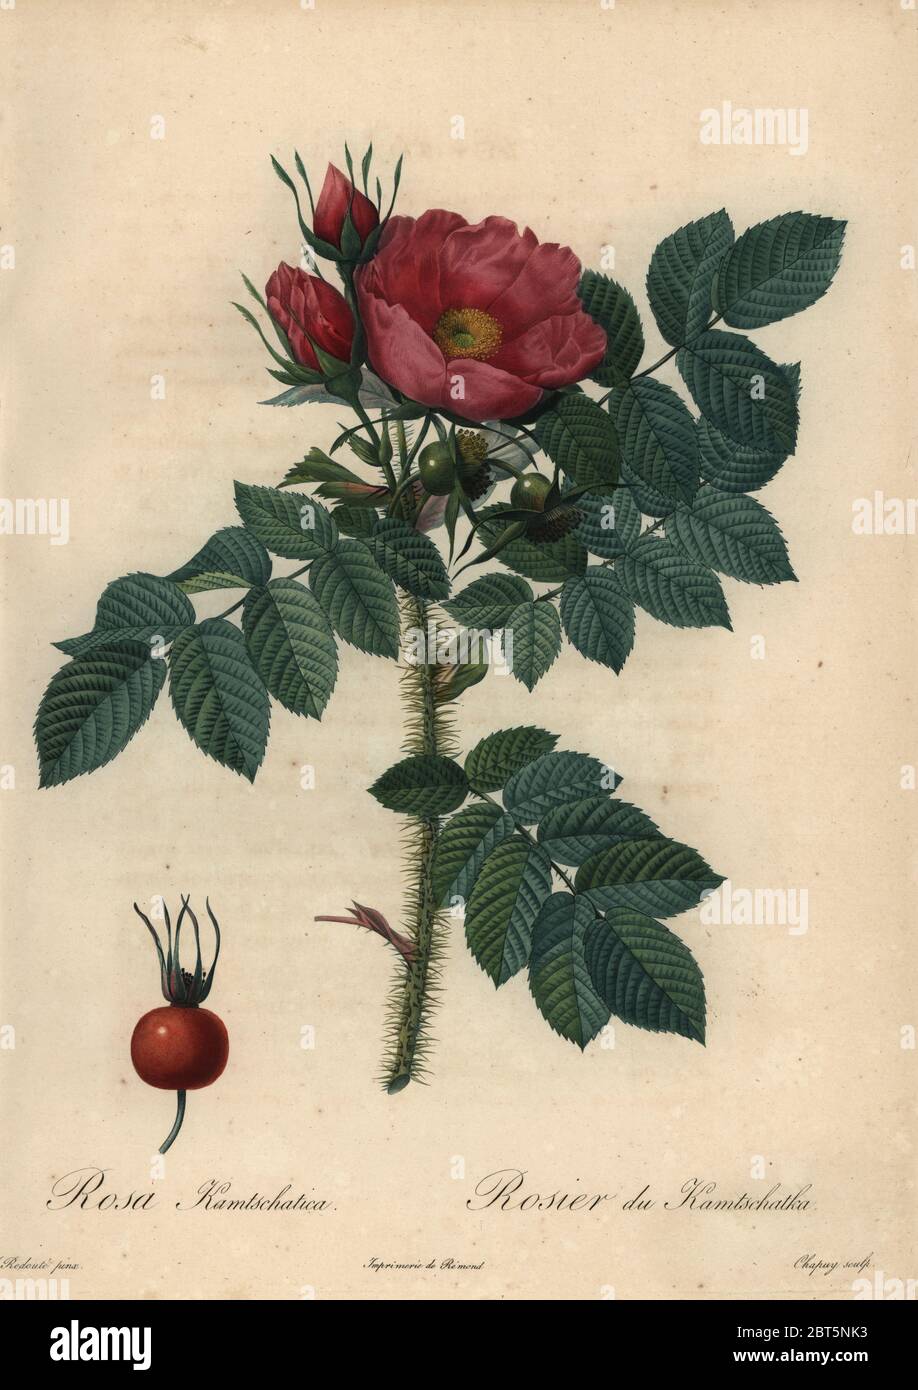 Crimson Japanese rose, Rosa rugosa. Rosa kamtschatica, Rosier du Kamtschatka.. Stipple copperplate engraving by Jean Baptiste Chapuy handcoloured a la poupee after a botanical illustration by Pierre-Joseph Redoute from the first folio edition of Les Roses, Firmin Didot, Paris, 1817. Stock Photo